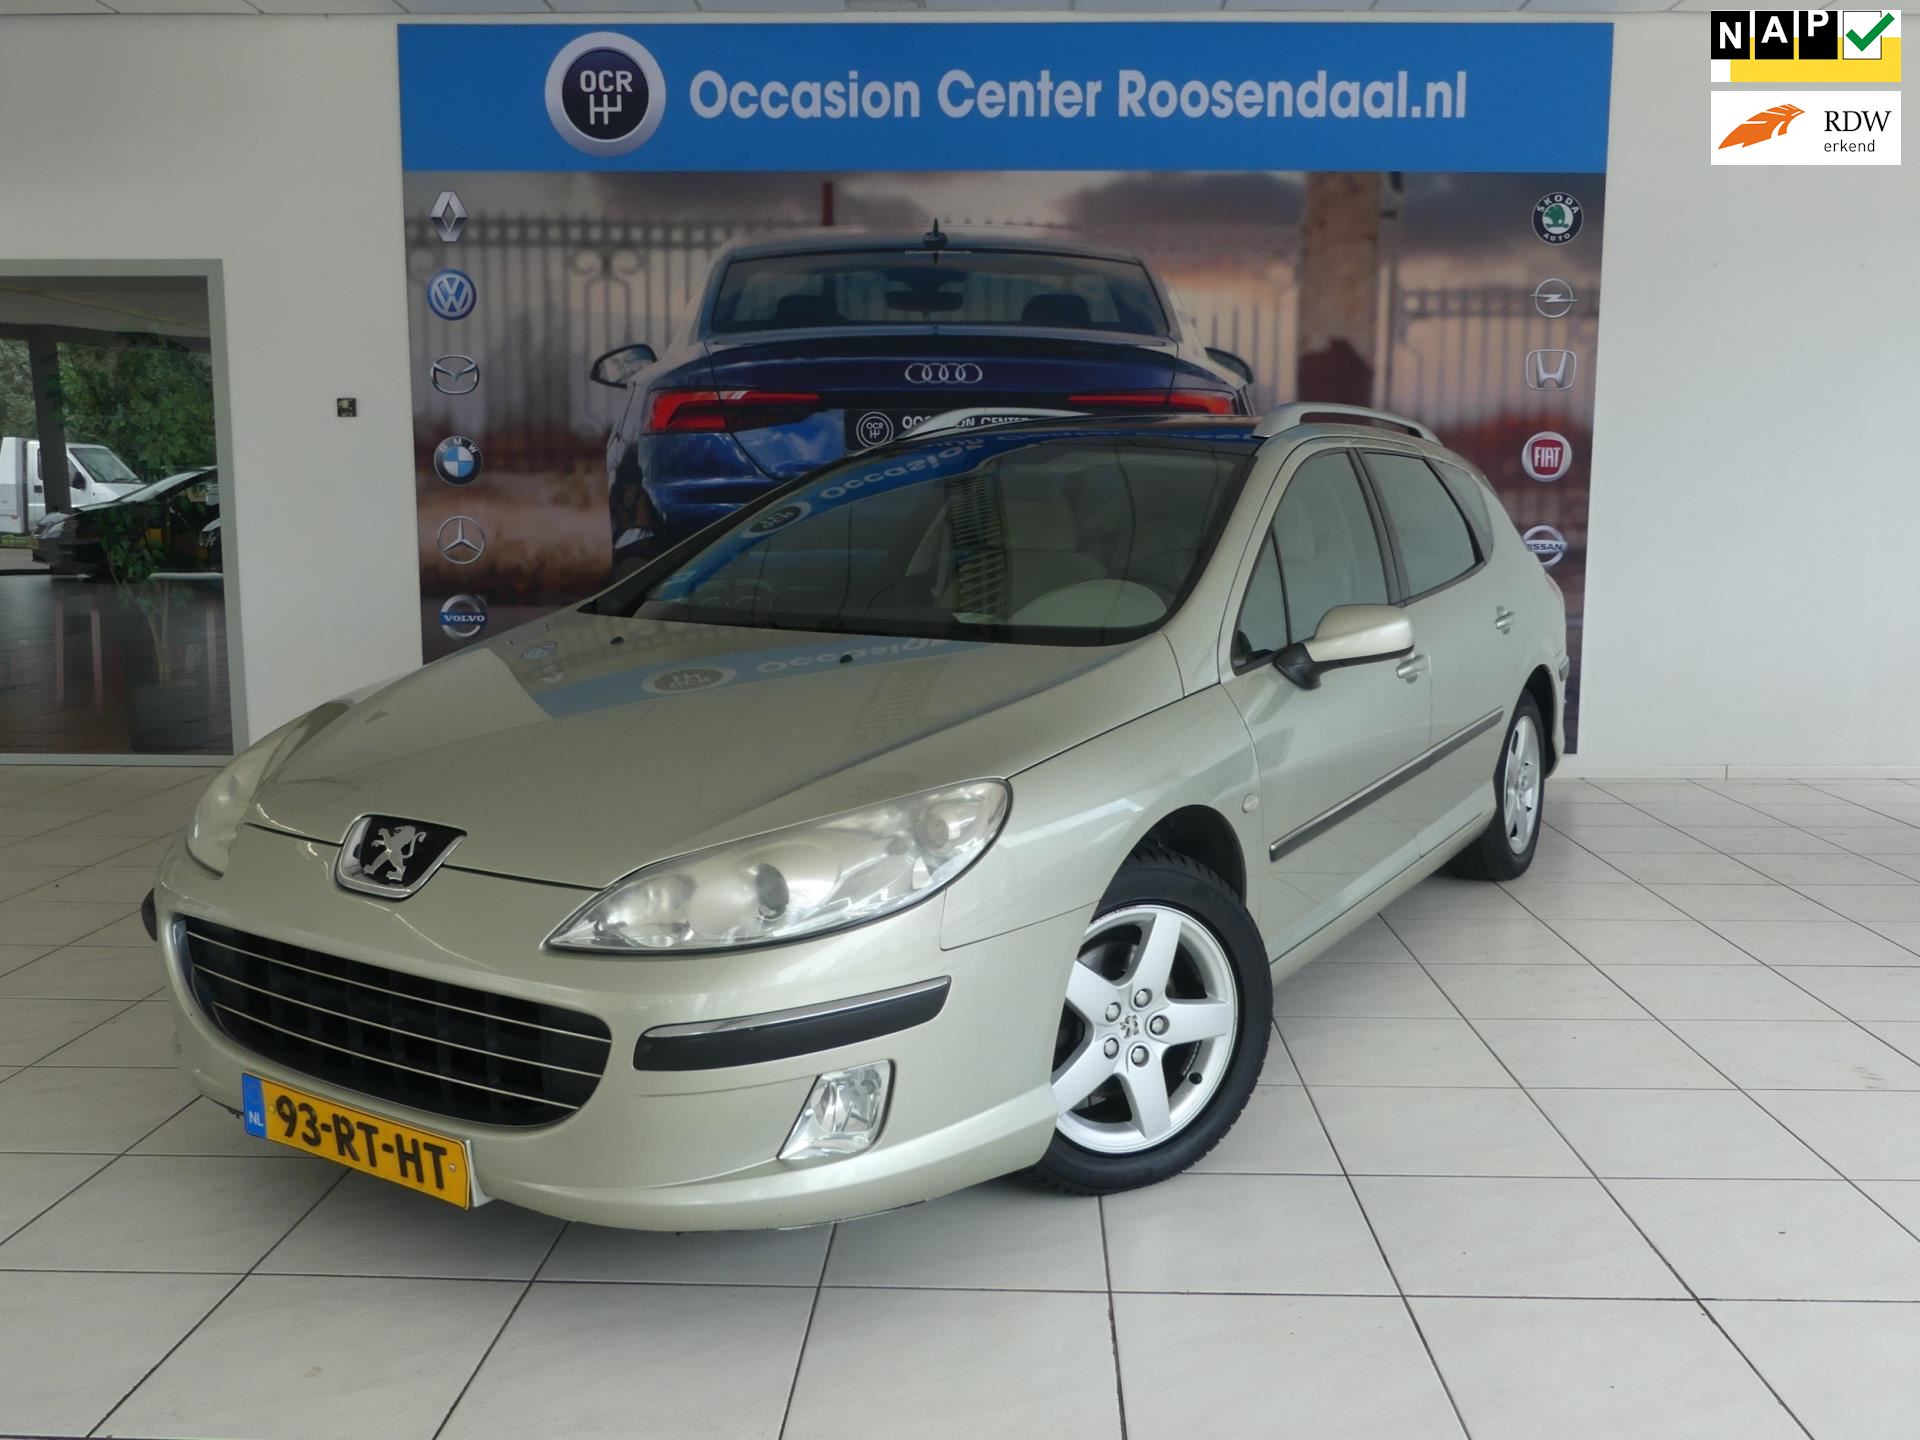 Peugeot 407 SW occasion - Occasion Center Roosendaal